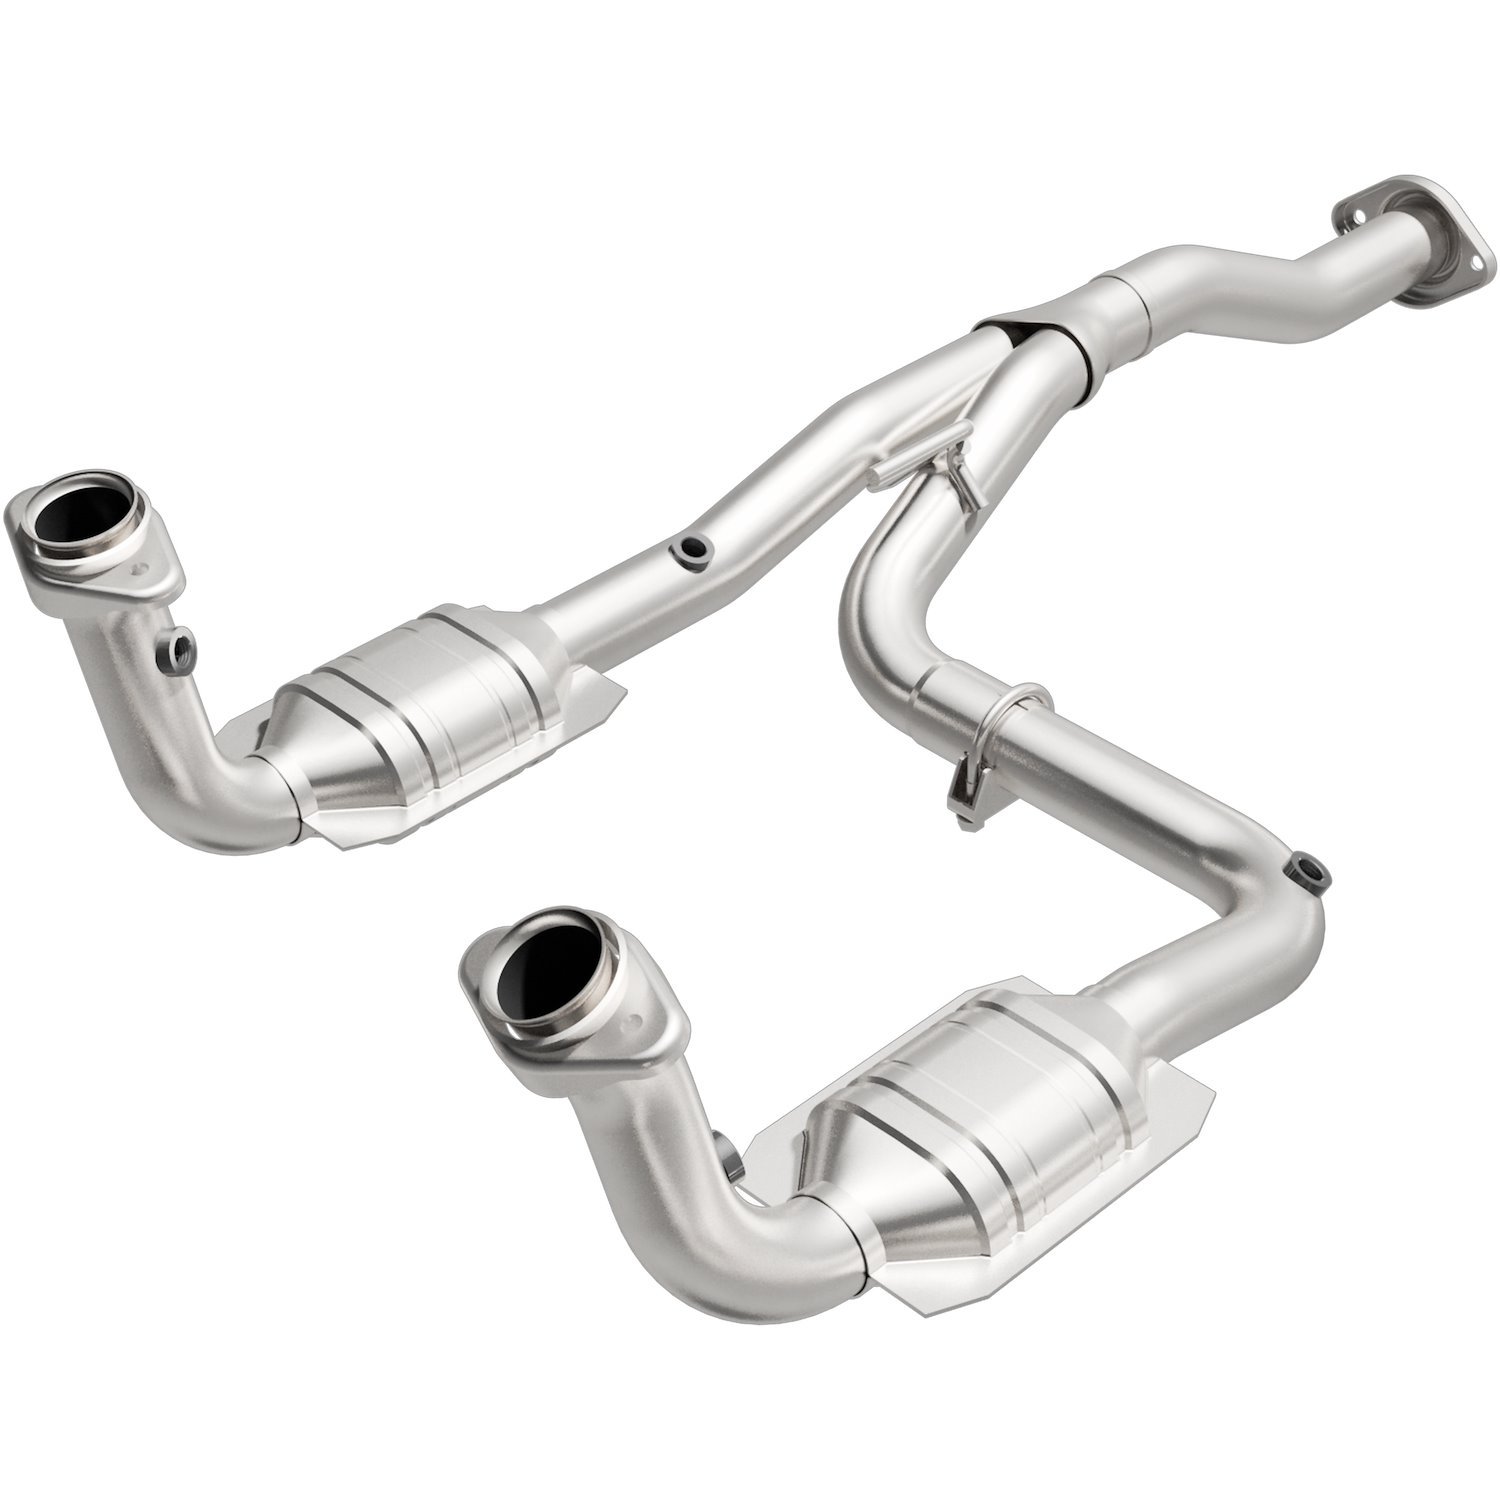 2005-2007 Jeep Liberty OEM Grade Federal / EPA Compliant Direct-Fit Catalytic Converter